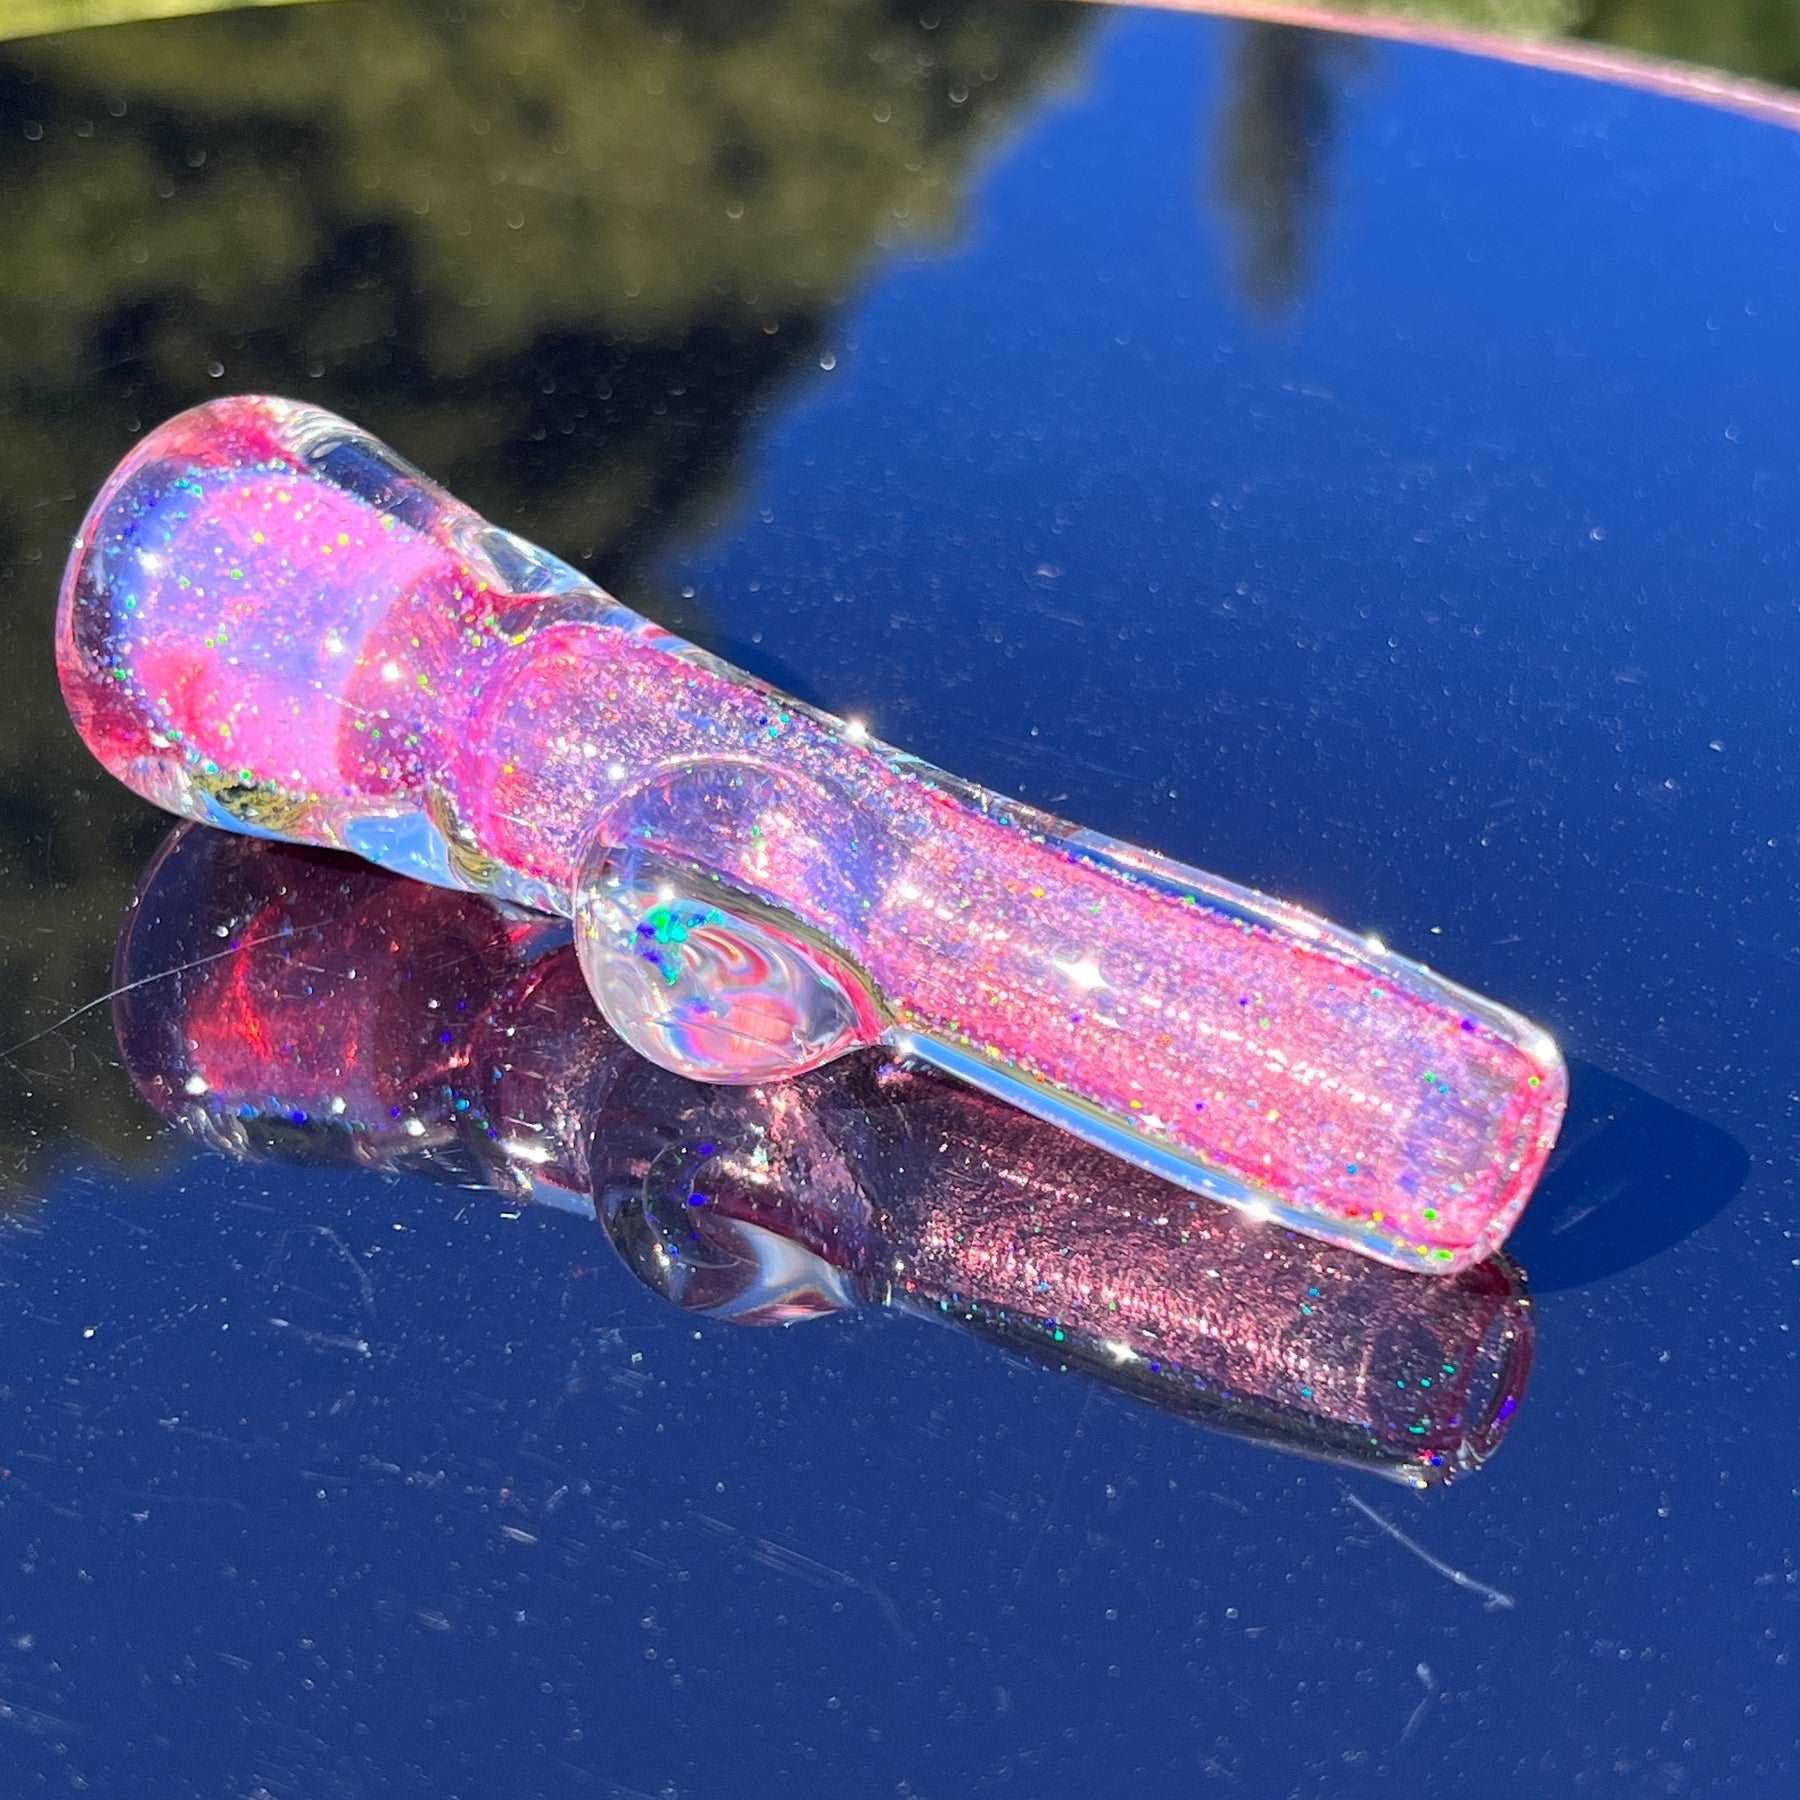 Onlybongs Chill Chillum Water Pipe | Not That High